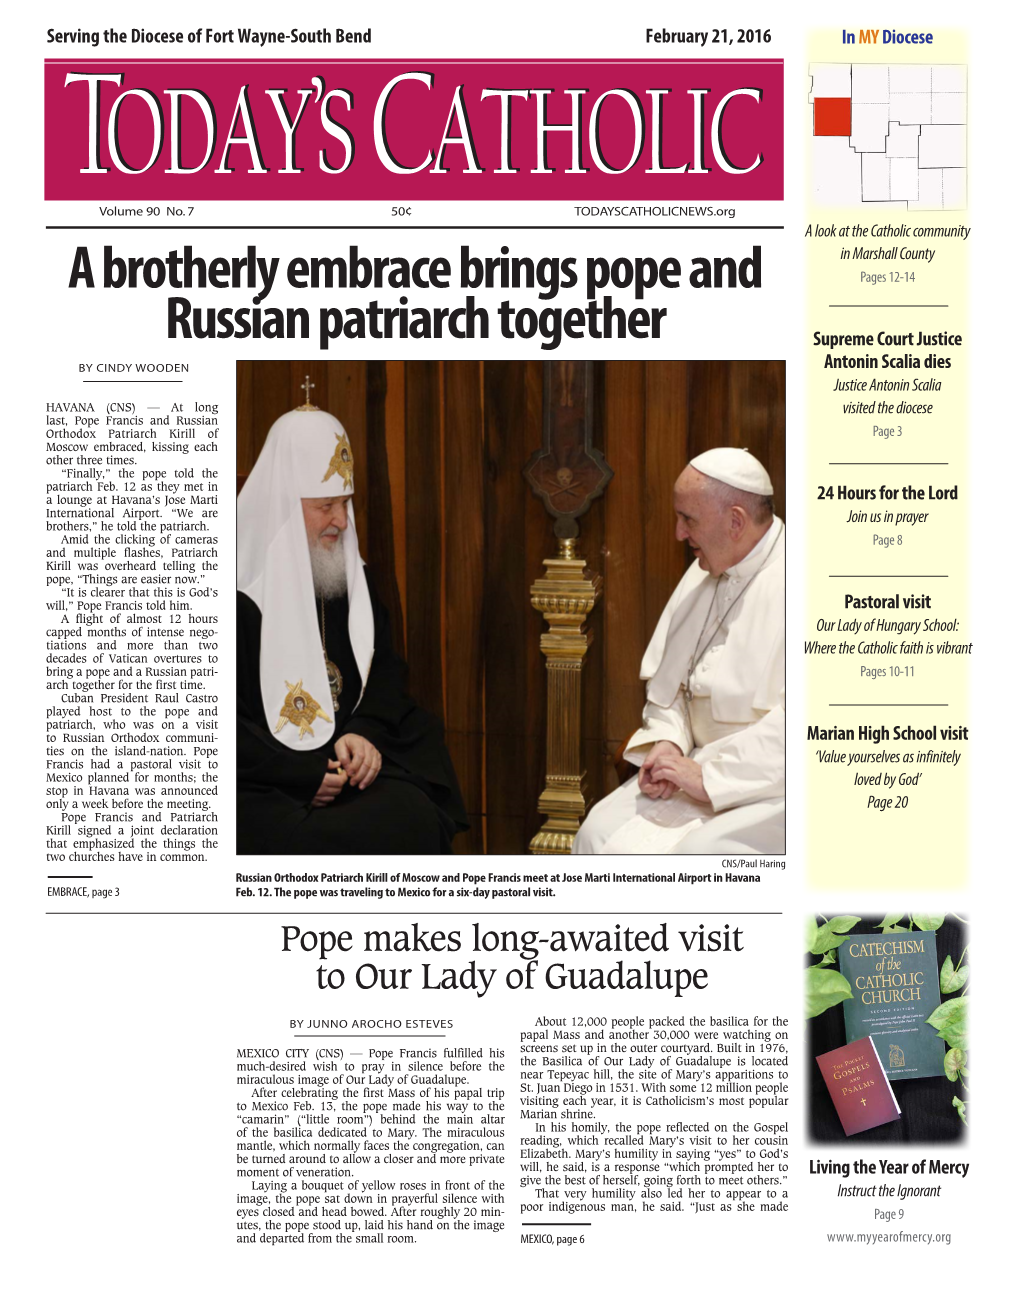 A Brotherly Embrace Brings Pope and Russian Patriarch Together